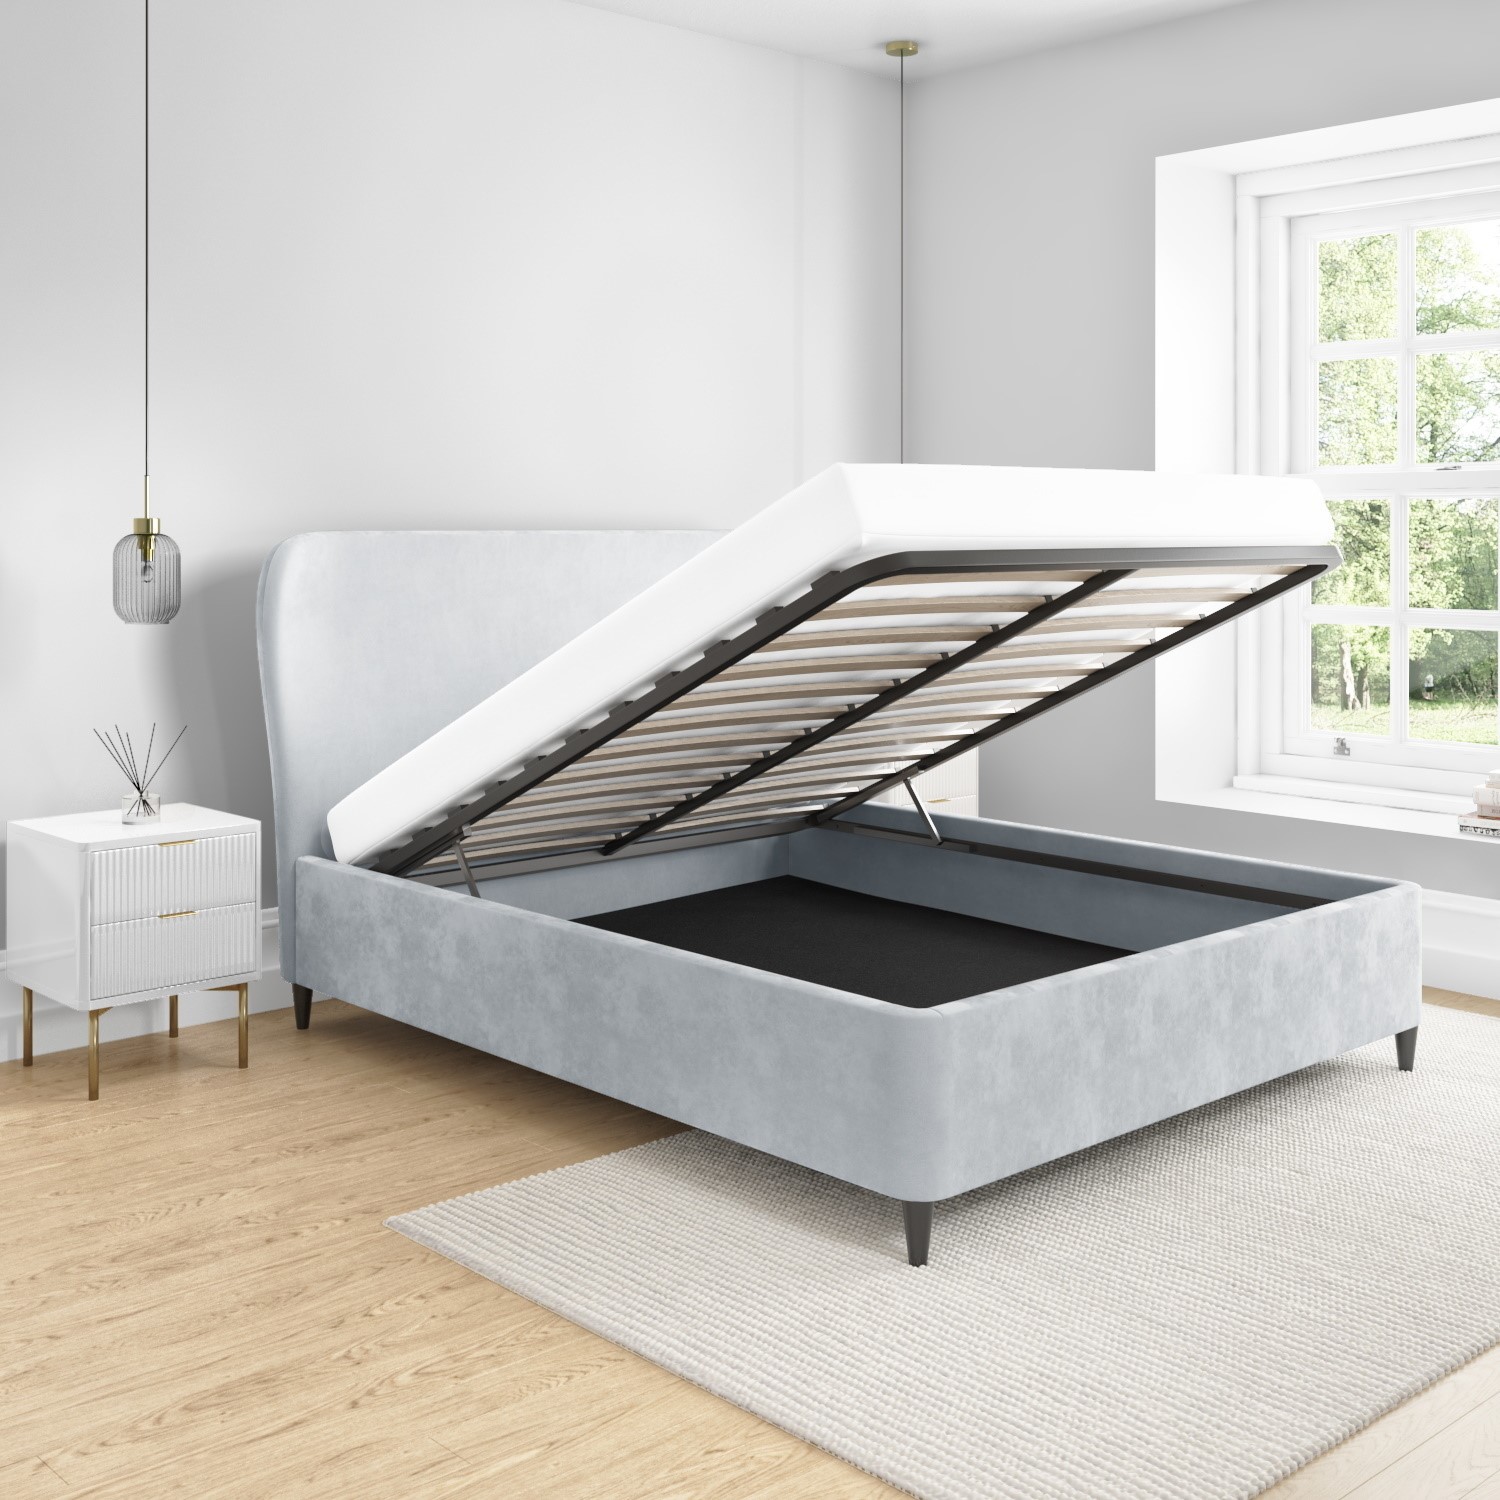 Read more about Margot velvet ottoman bed in king size silver grey